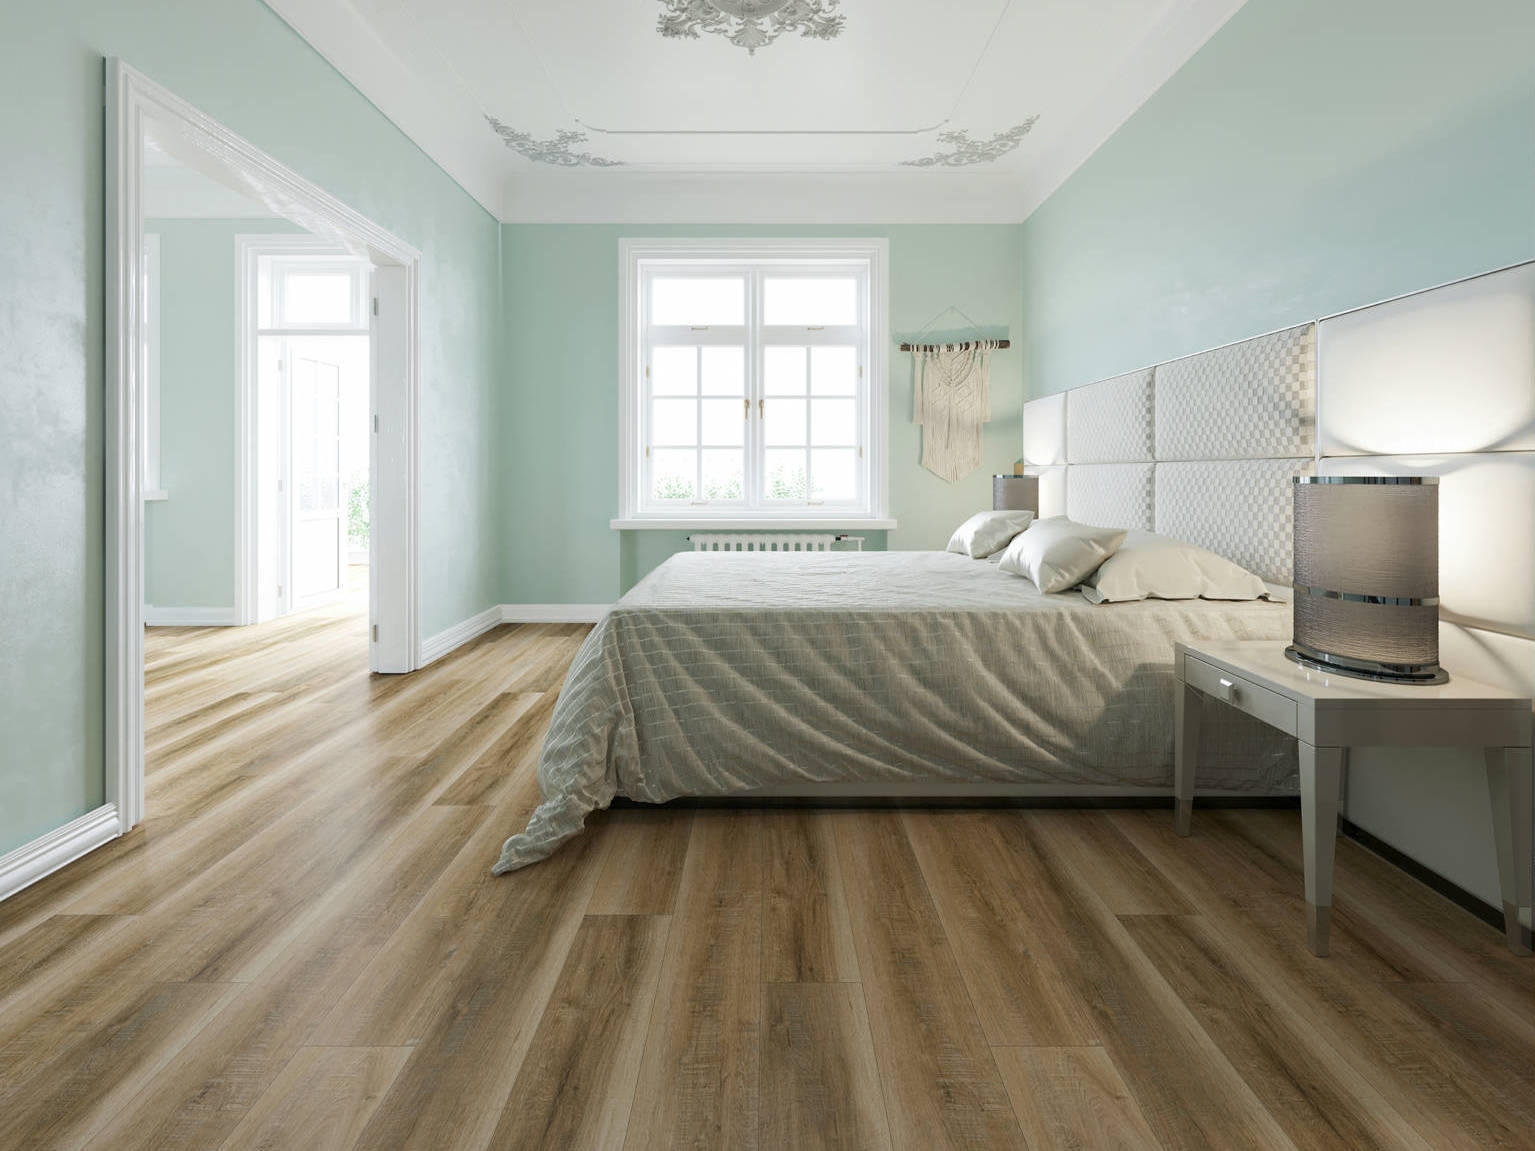 Timber Ridge Gold 12 2 | Qualis Ceramica | Luxury Tile and Vinyl at affordable prices